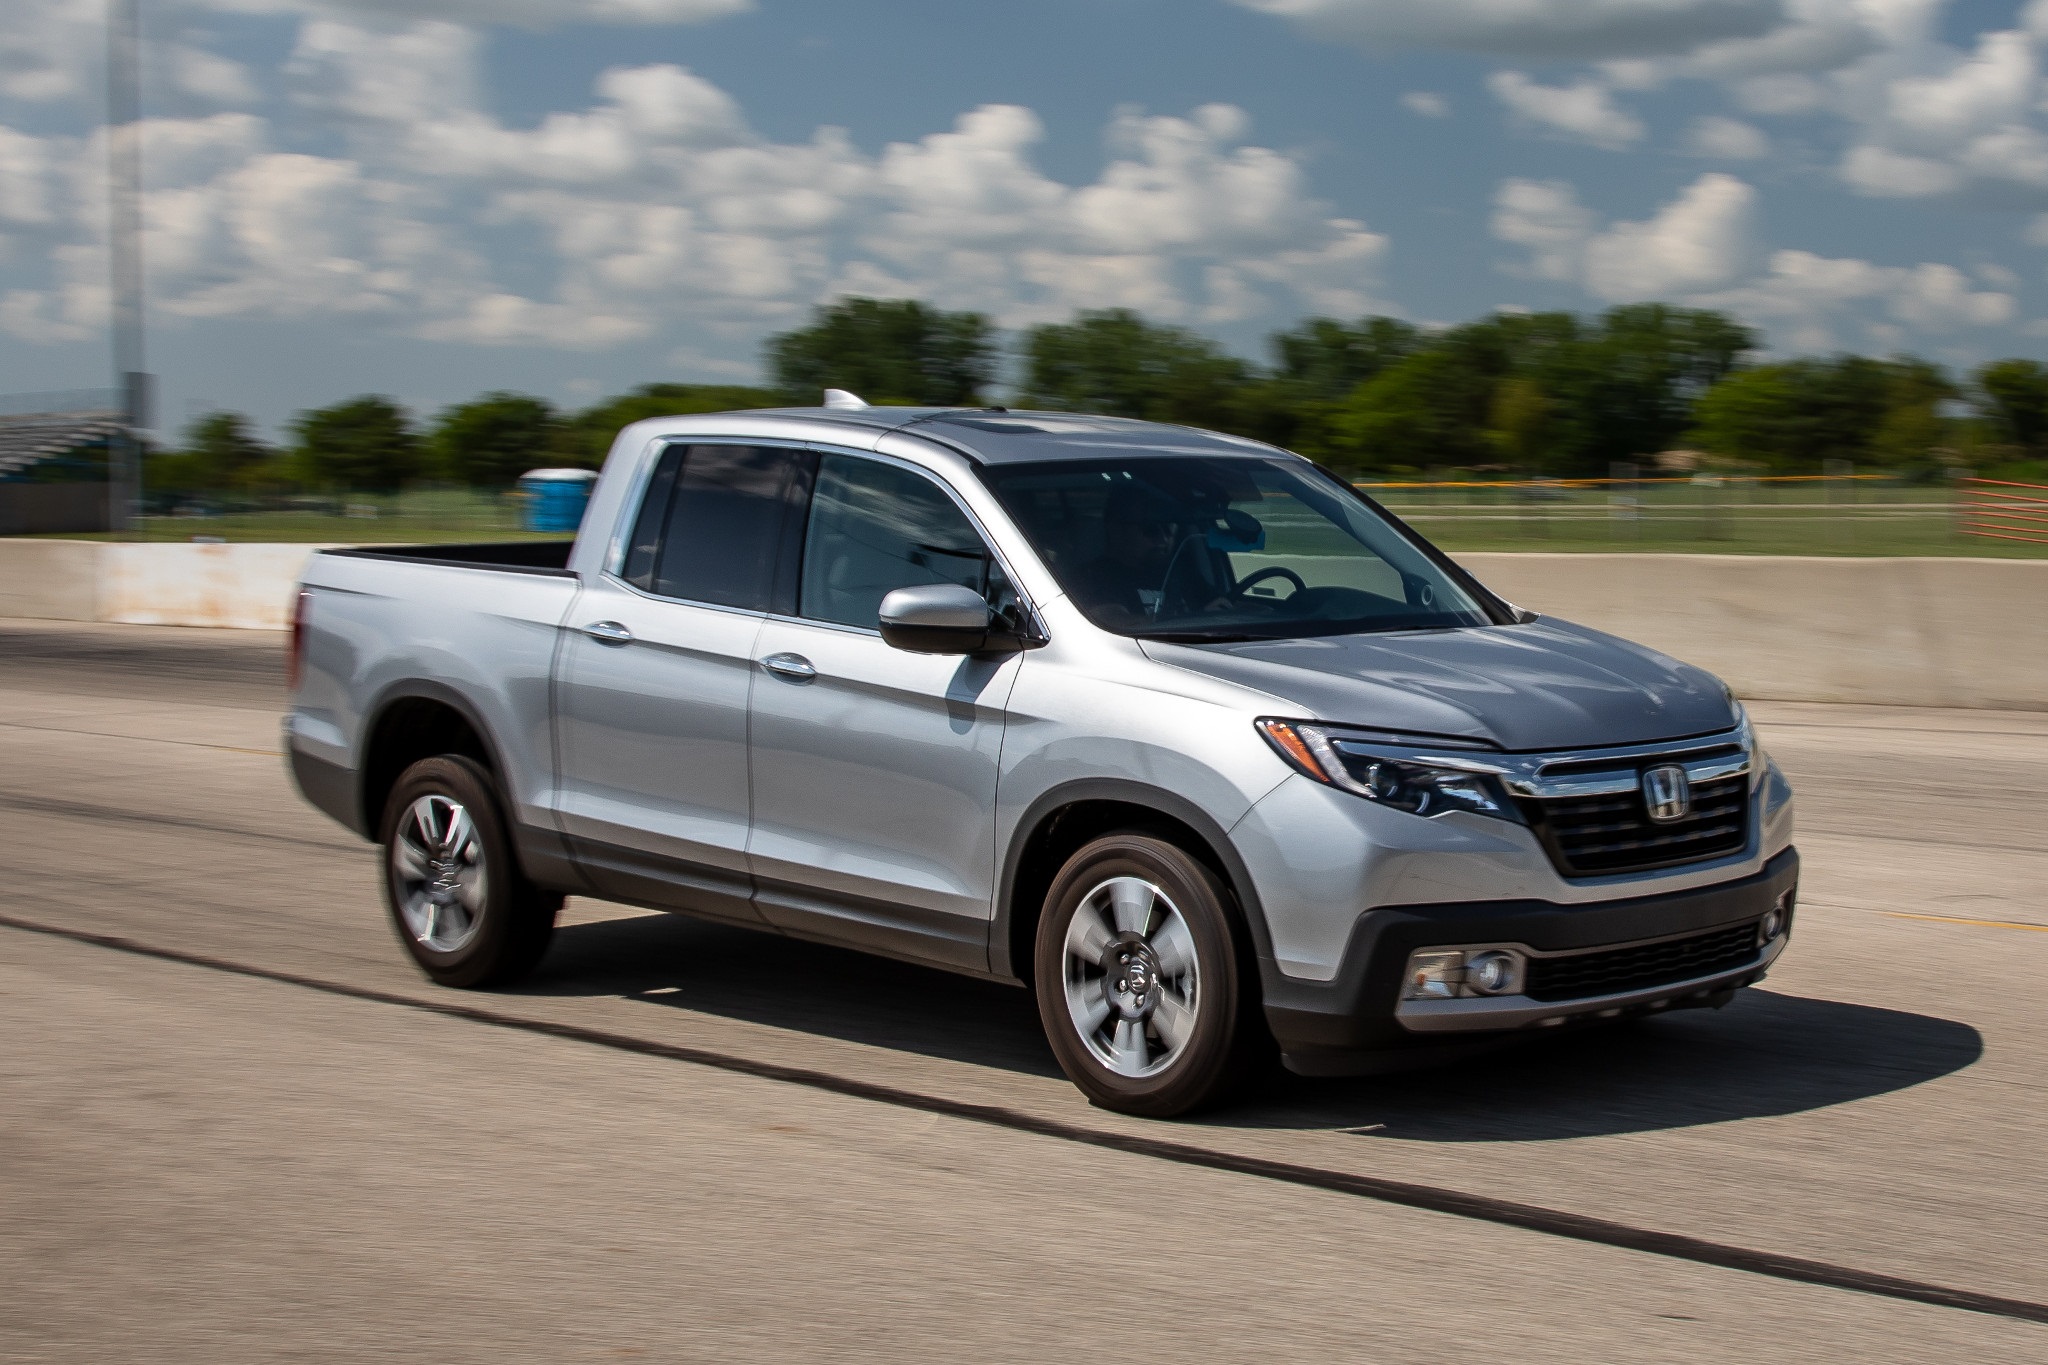 2022 Honda Ridgeline Might Get Facelift and Type R Version ...